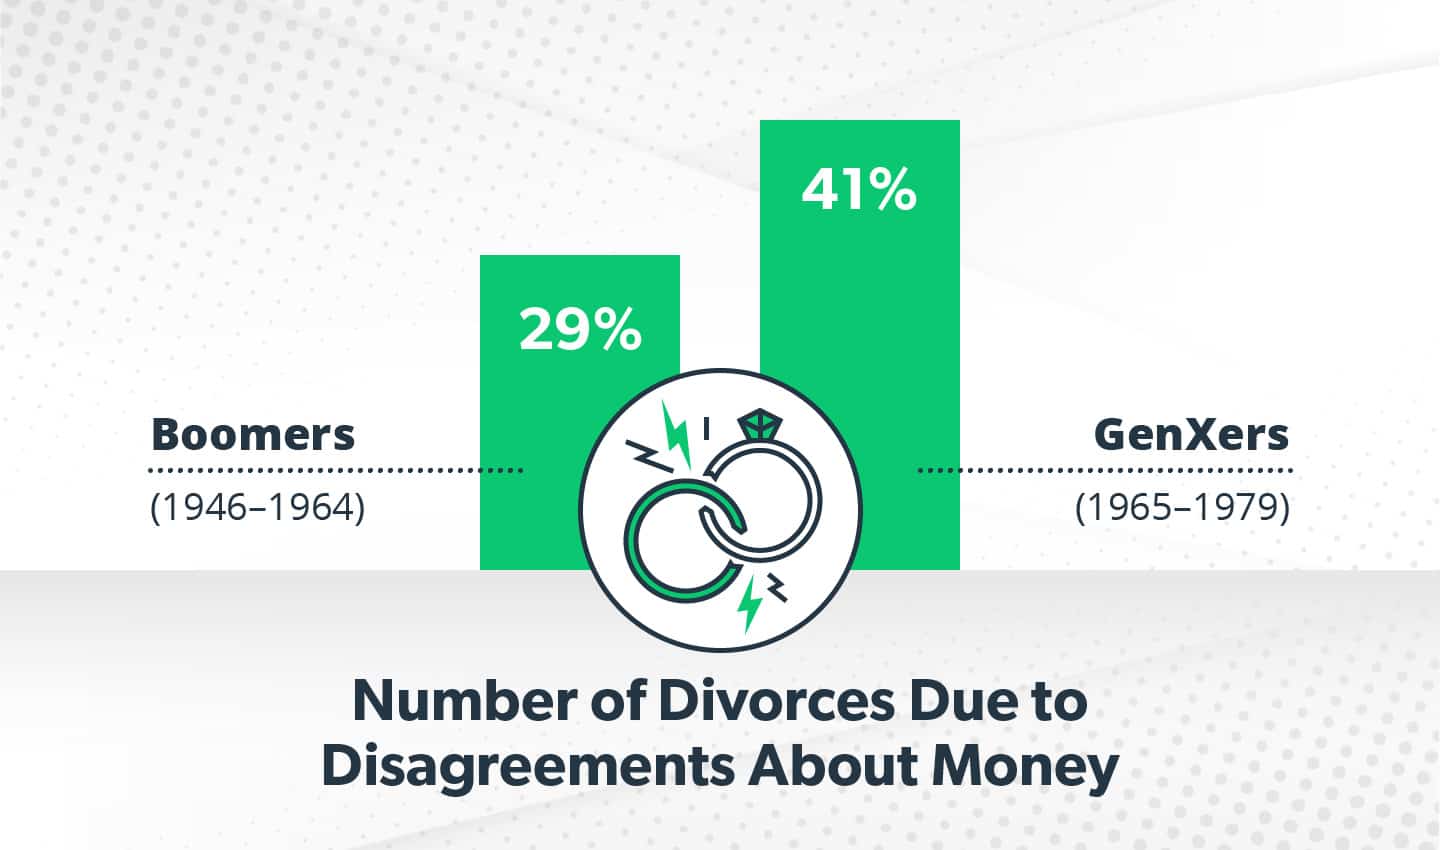 Money is a leading cause of divorce